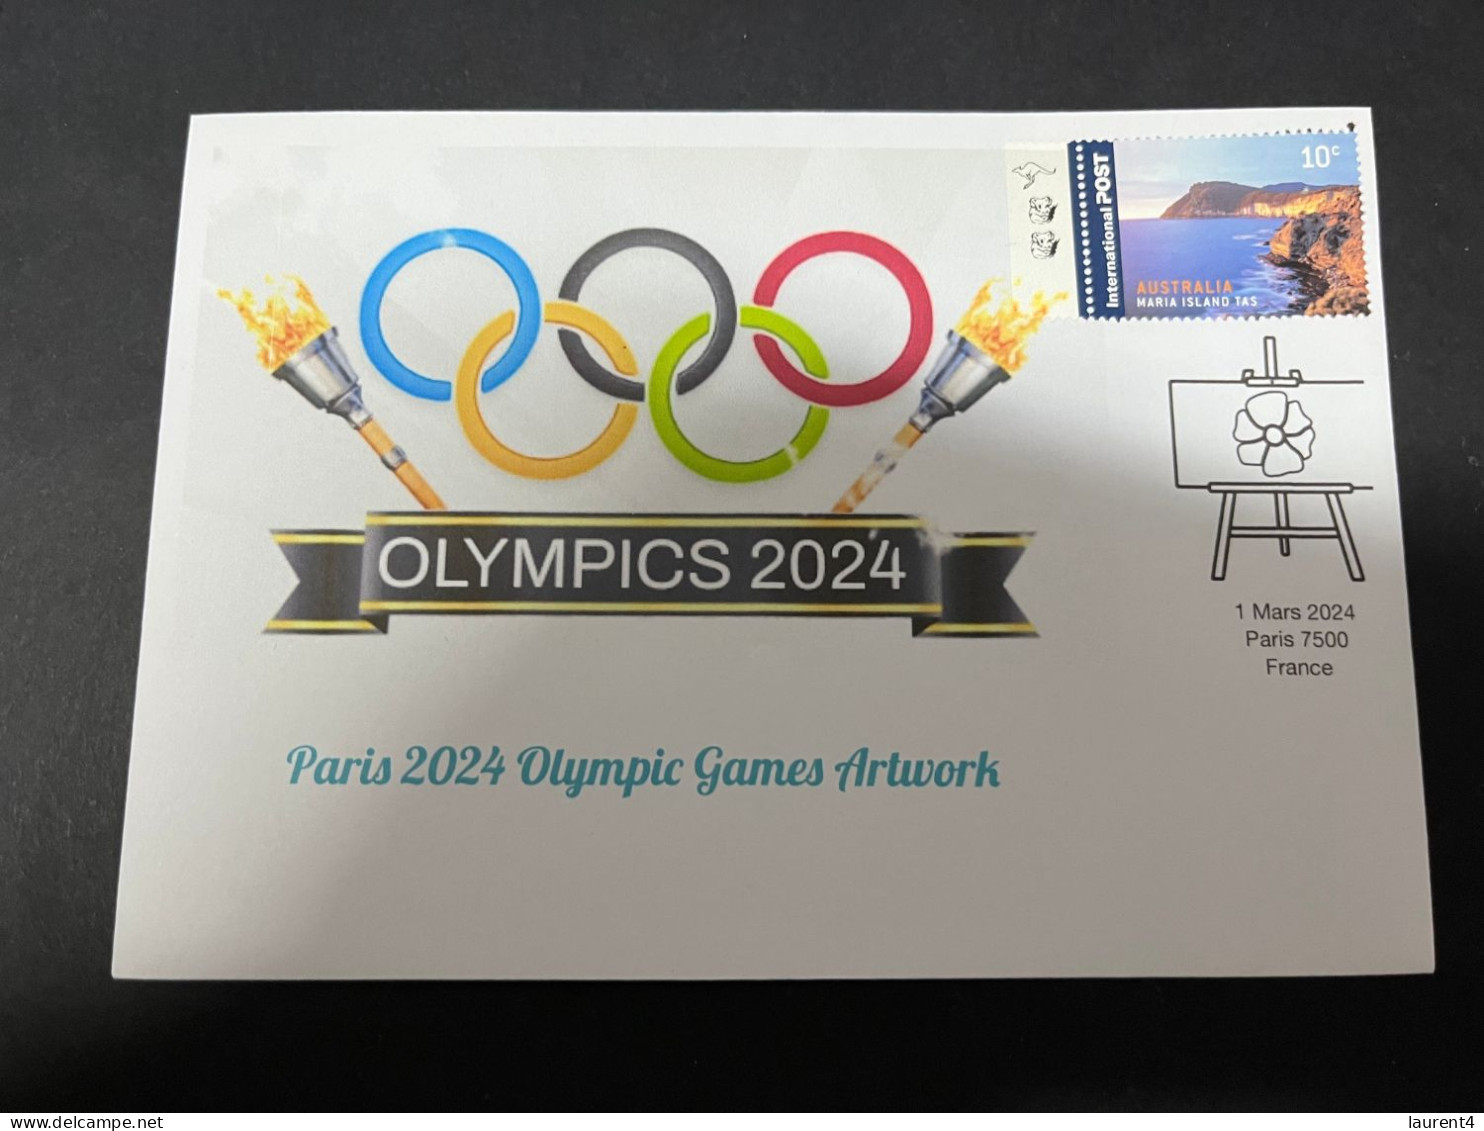 11-3-2024 (2 Y 43) Paris Olympic Games 2024 - 8 (of 12 Covers Series) For The Paris 2024 Olympic Games Artwork - Verano 2024 : París